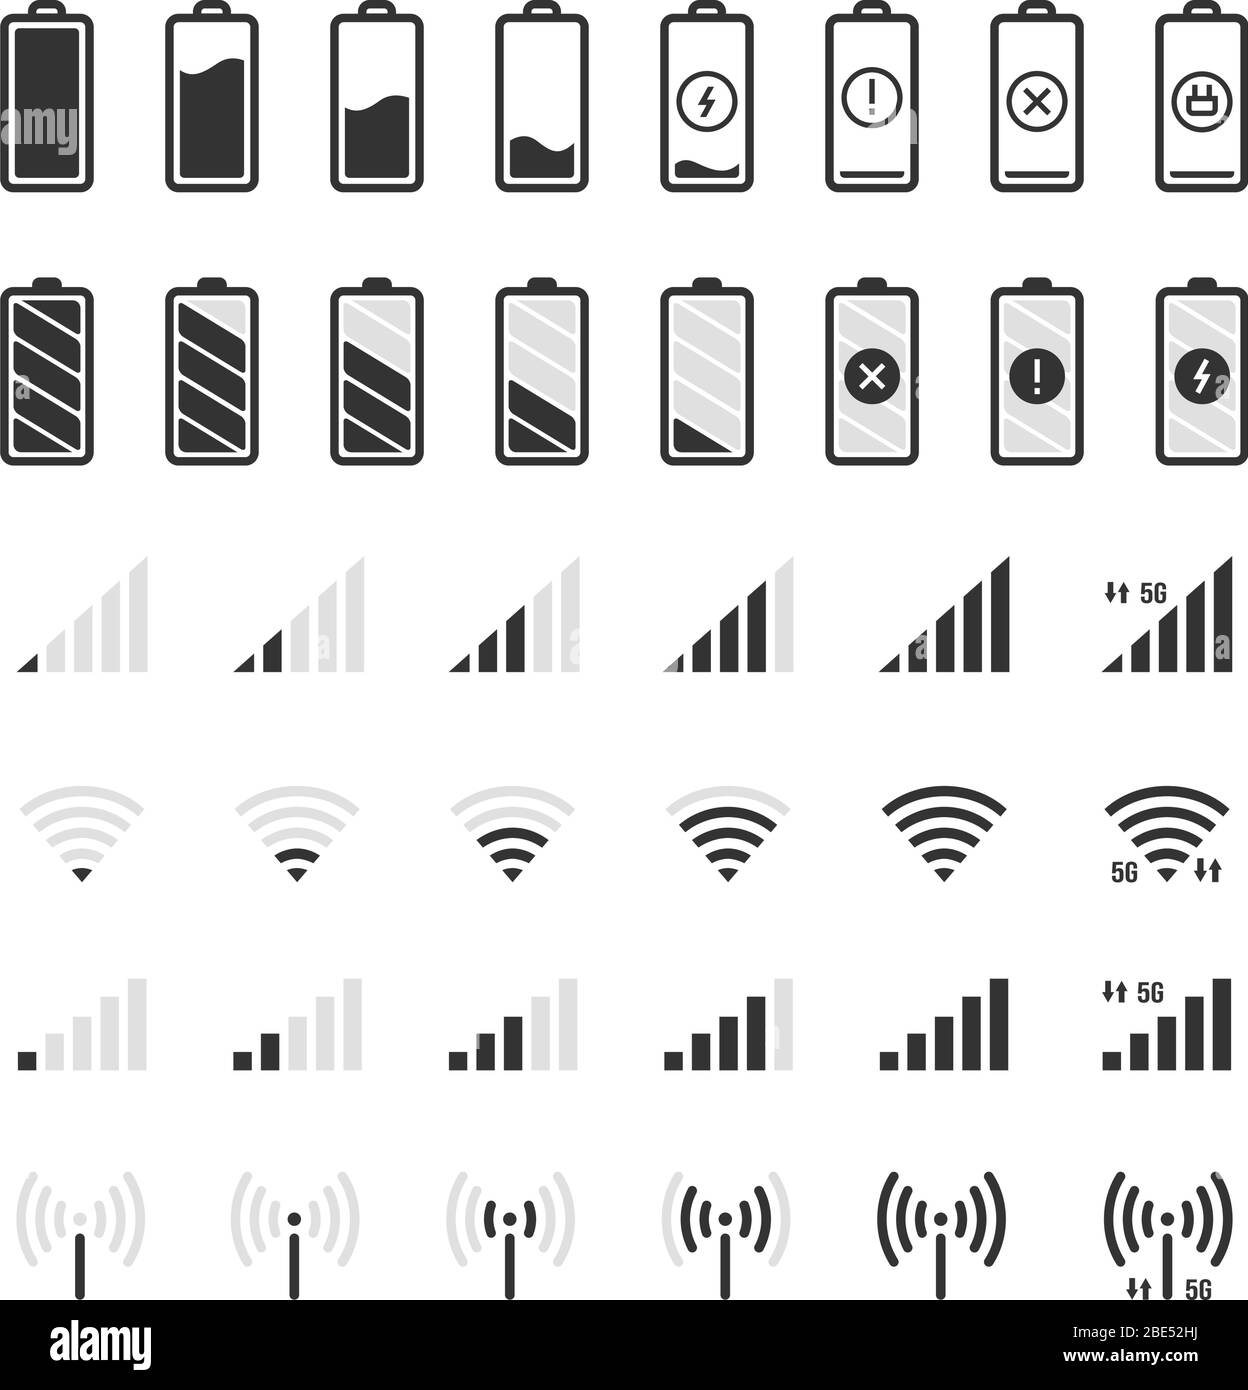 Battery and connection icons. Smartphone charge level, wifi and gsm signal strength, battery energy full and empty status UI elements vector isolated Stock Vector